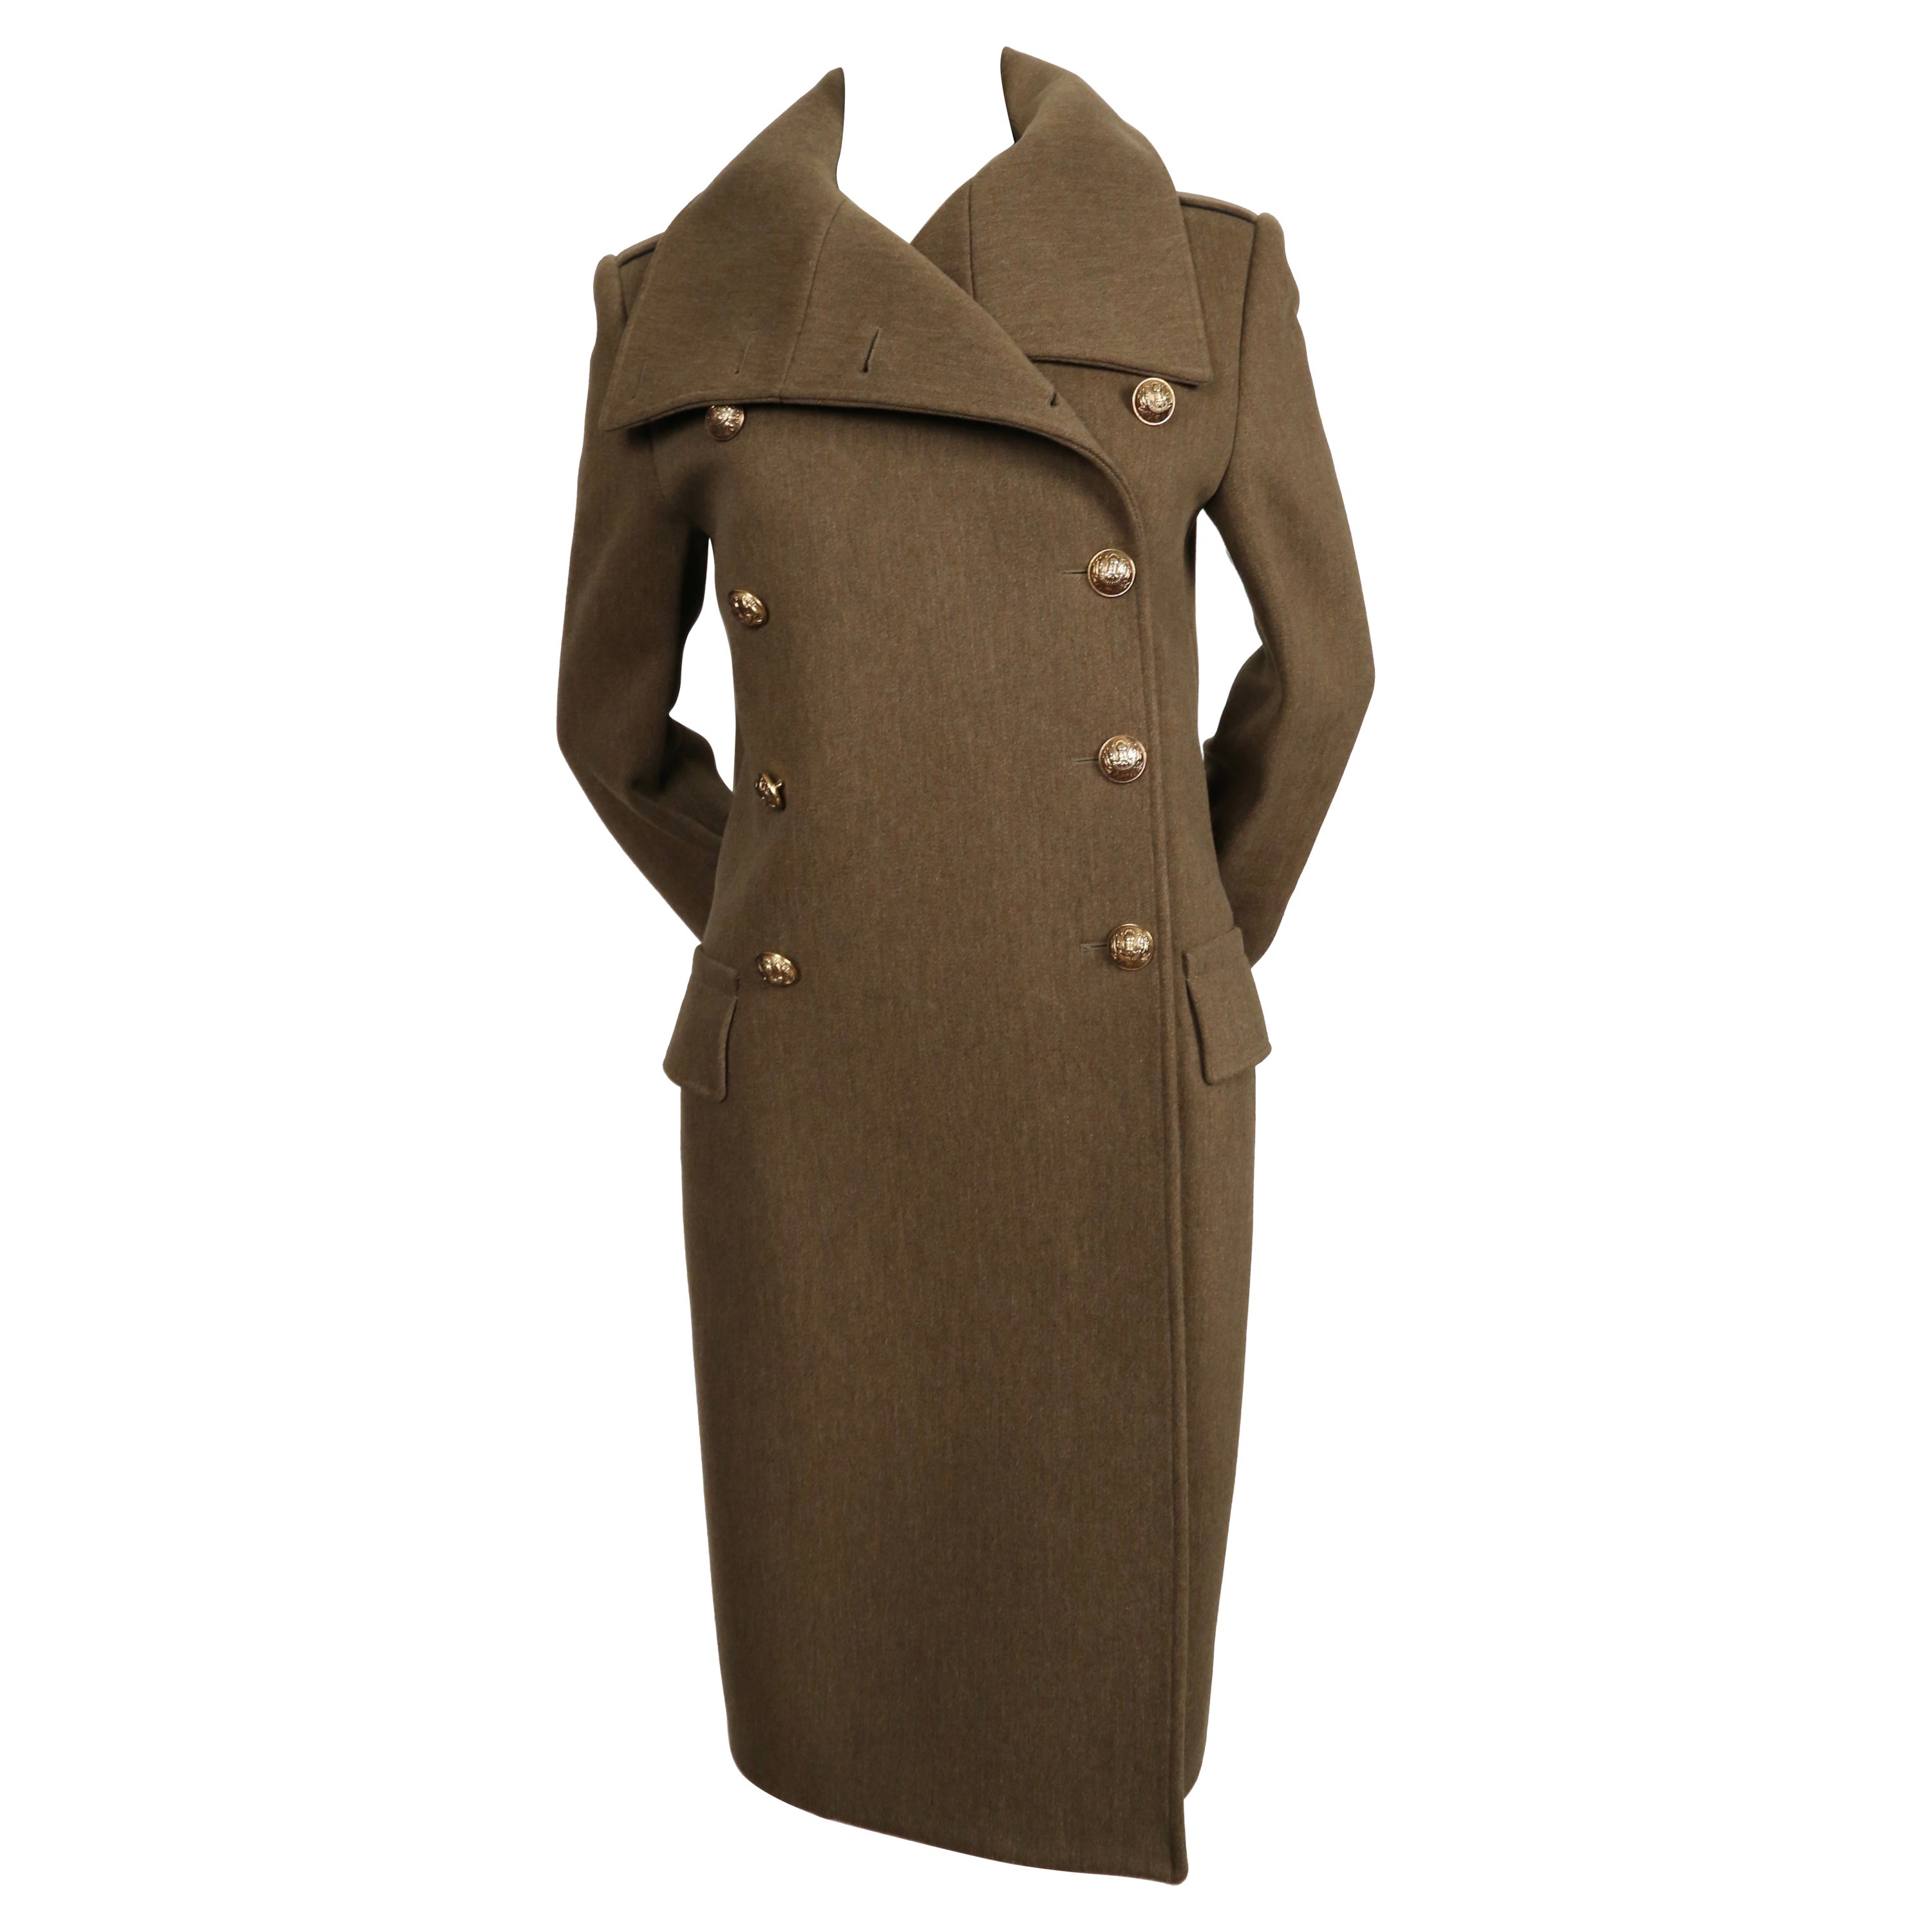 2011 BALMAIN olive green melton wool long military coat - new with tags For Sale